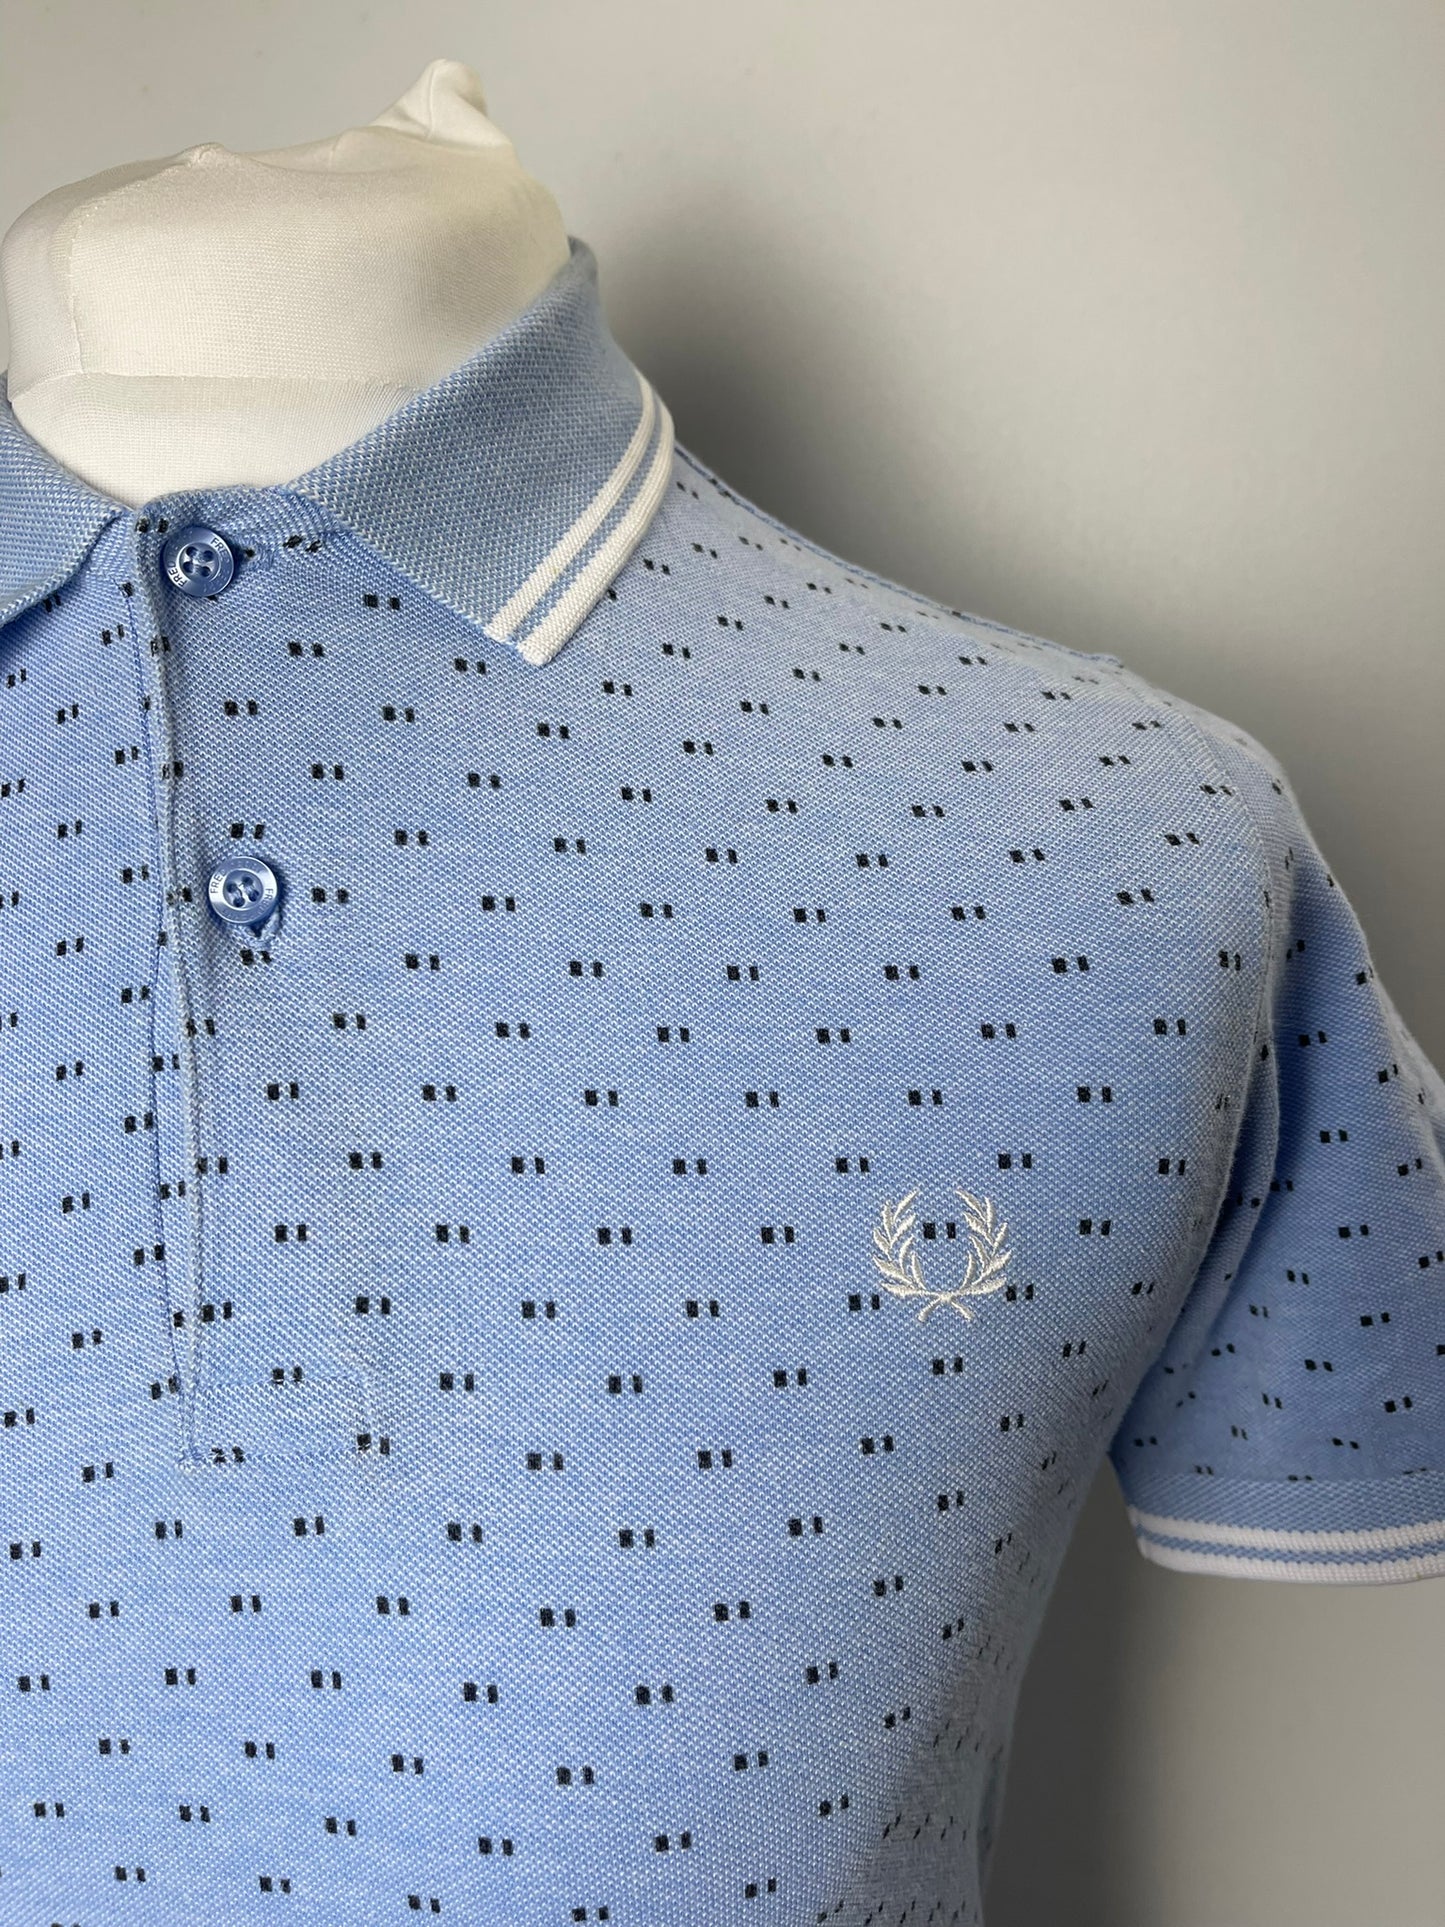 Fred Perry Blue Polo Top Small